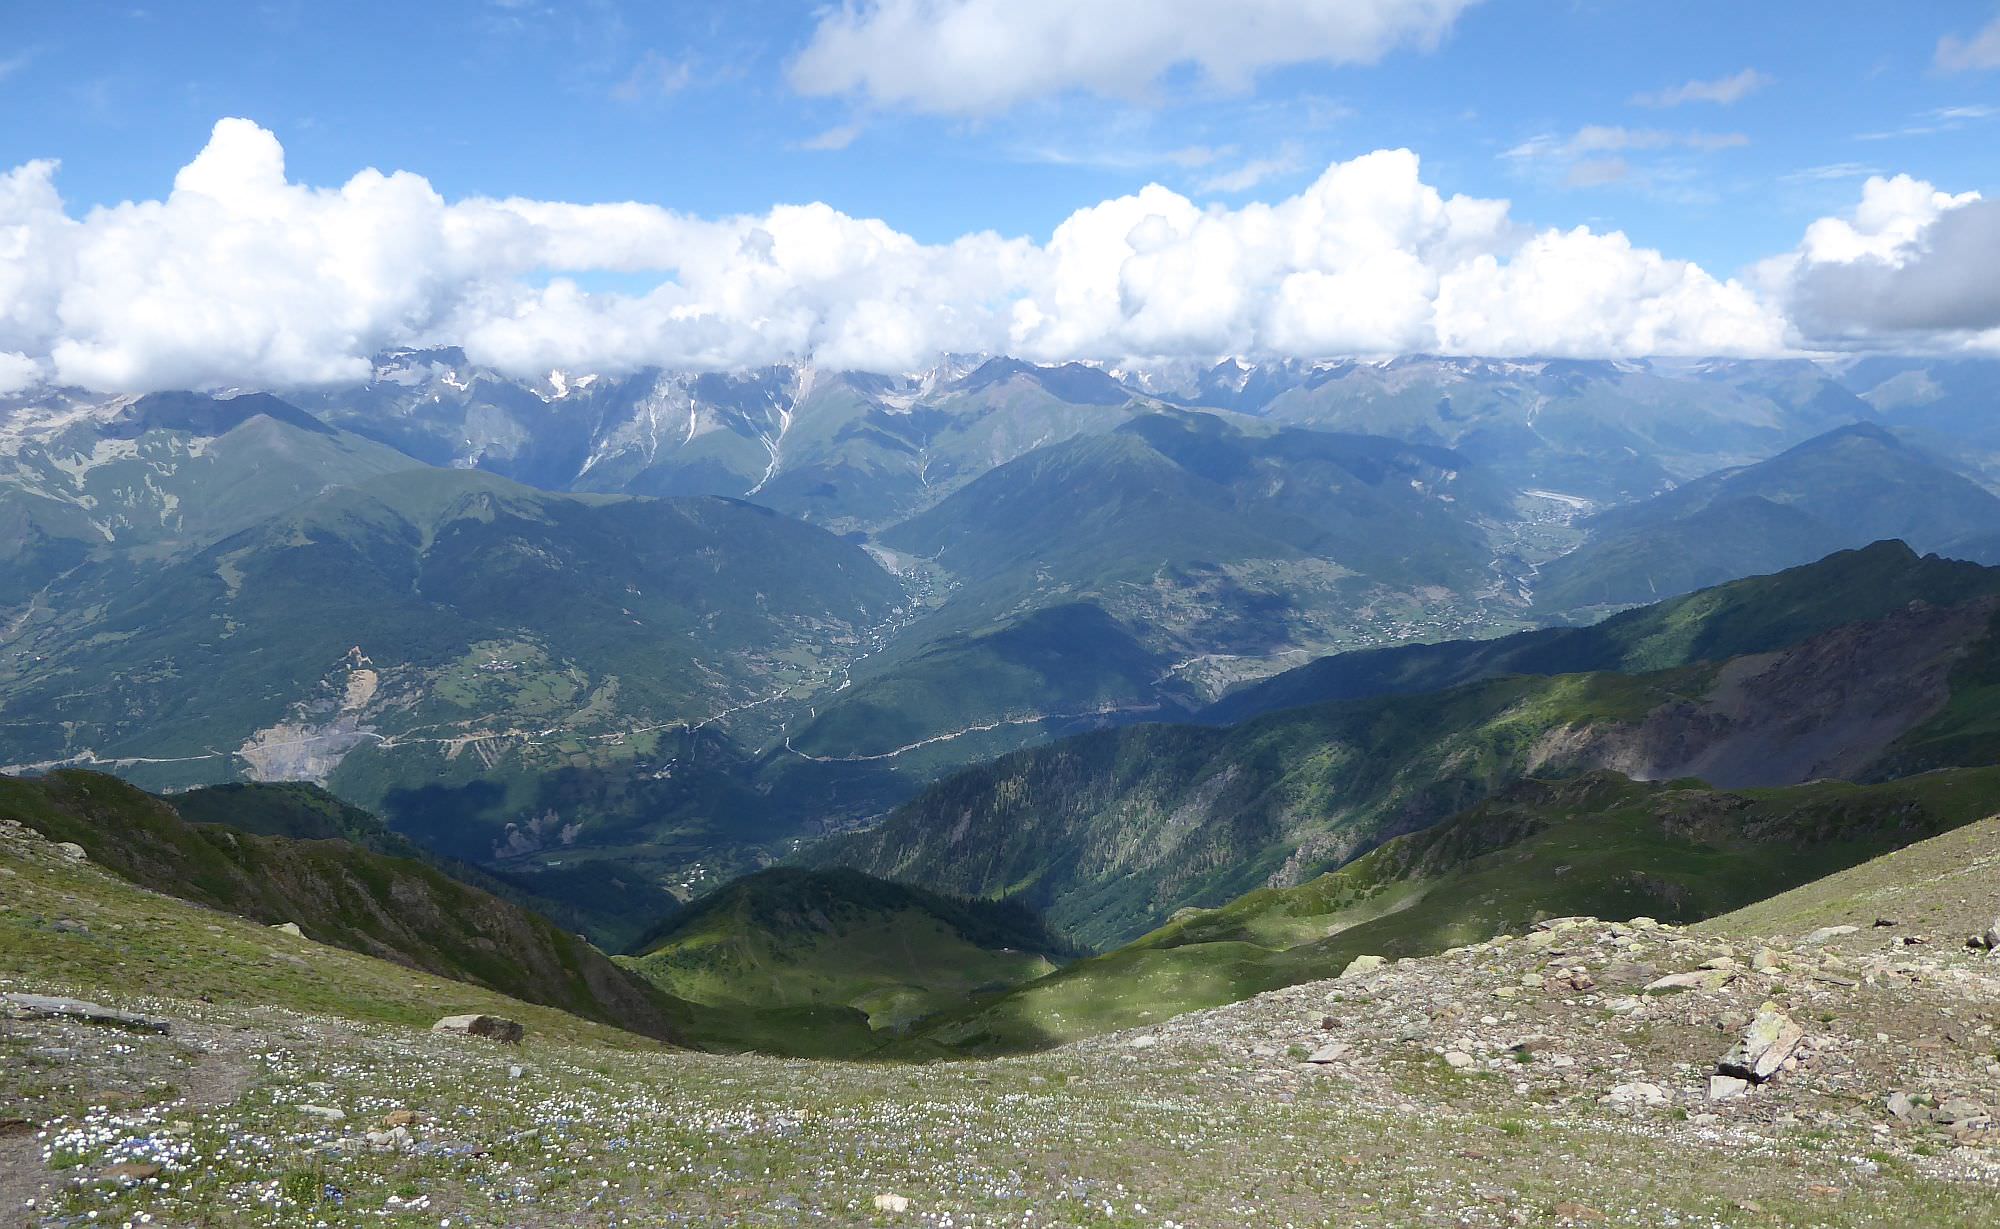 The views from the Chizdhi pass